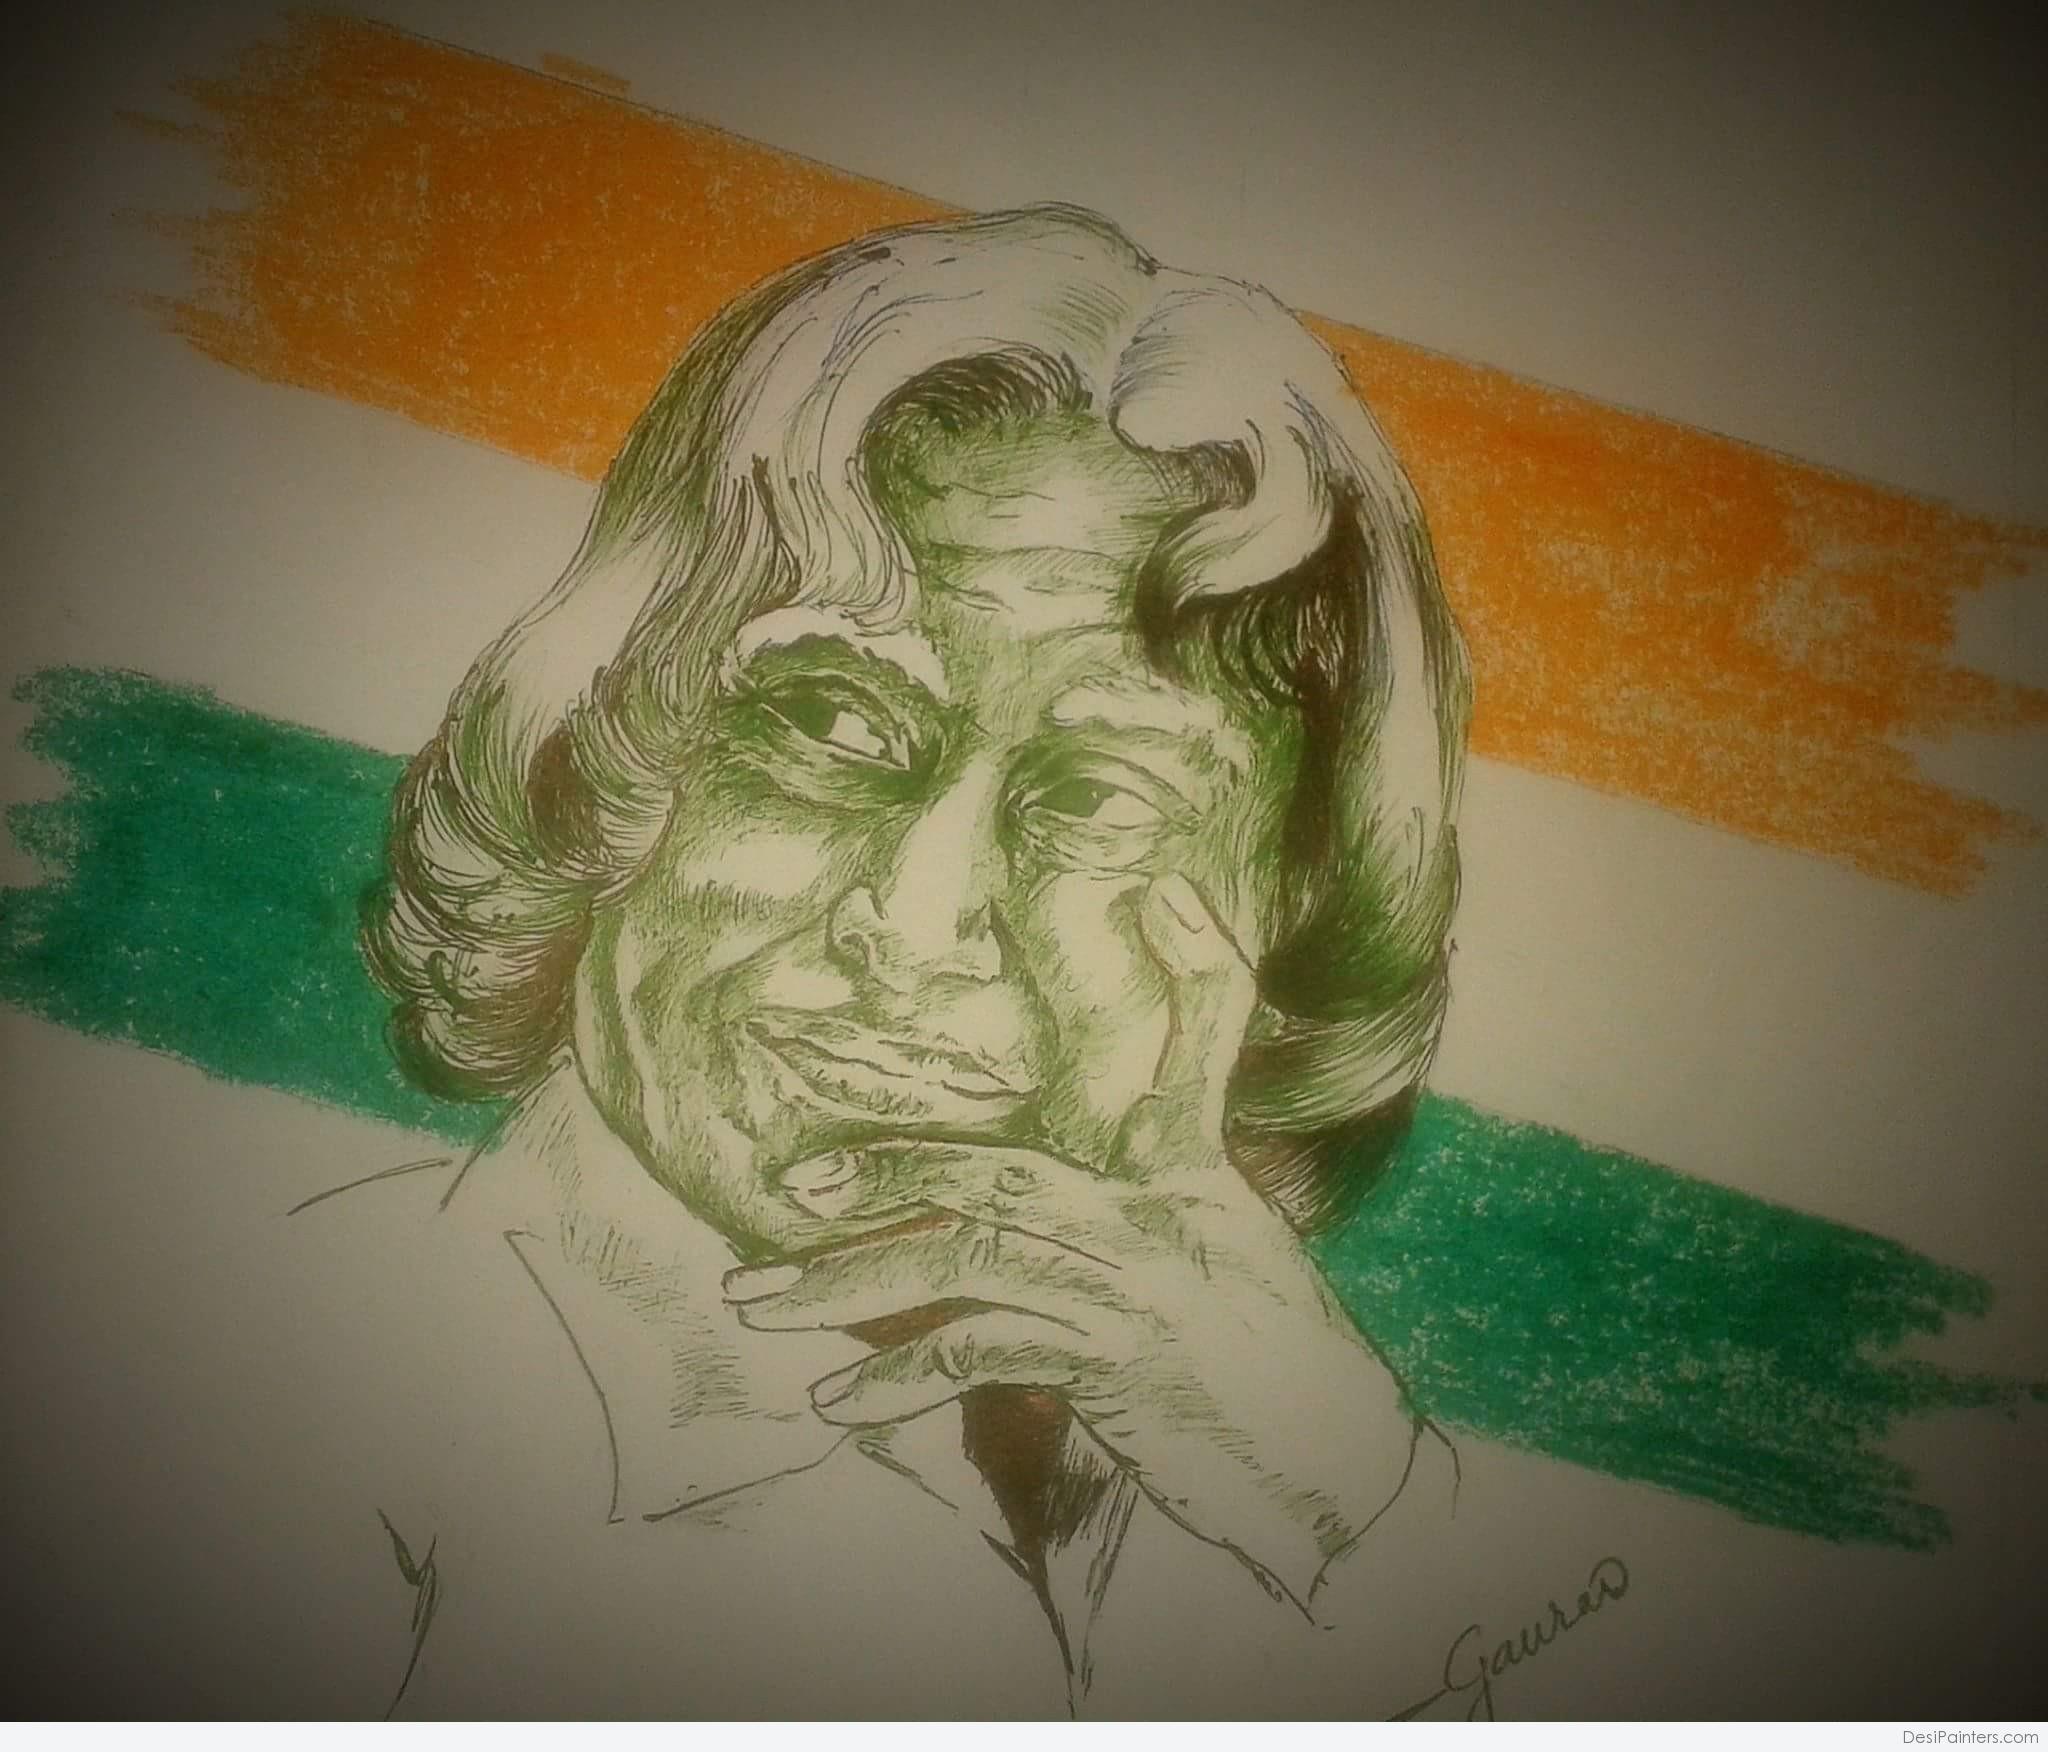 ART / DRAWING / ILLUSTRATION / PAINTING / SKETCHING - Anikartick: RIP / DR.A.P.J.ABDUL  KALAM / FORMER PRESIDENT,EMINENT SCIENTIST / GREAT GUIDER and TEACHER for  YOUNGSTERS,STUDENTS and KIDS